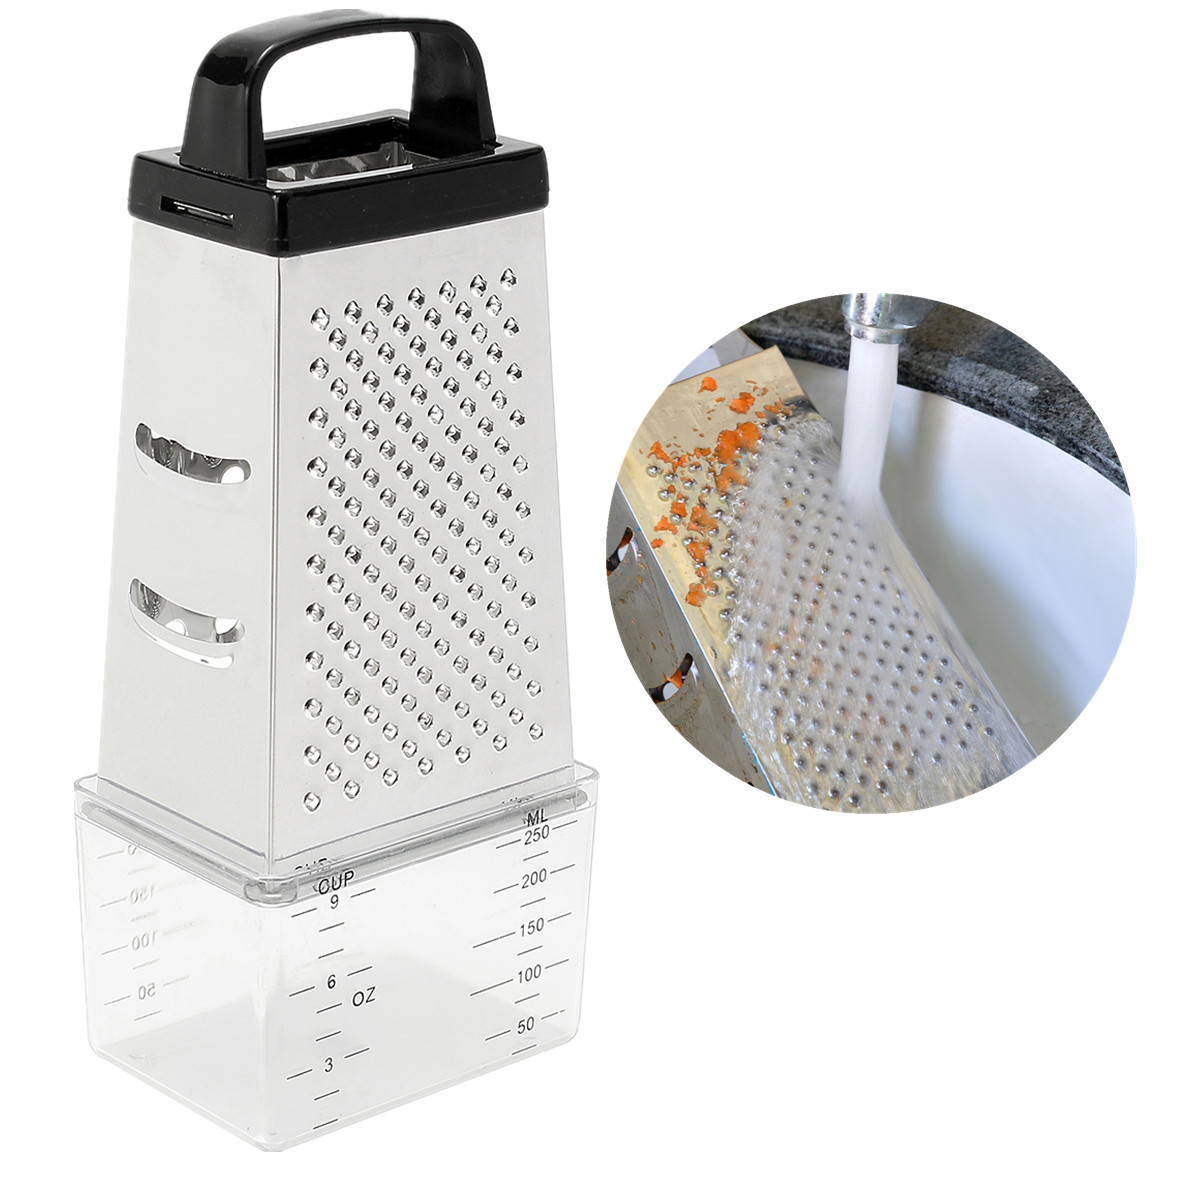 Grater-Box-Stainless-Steel-4-Sided-Multi-Funtion-Cheese-Vegetable-With-Container-Lunch-Box-1304772-9